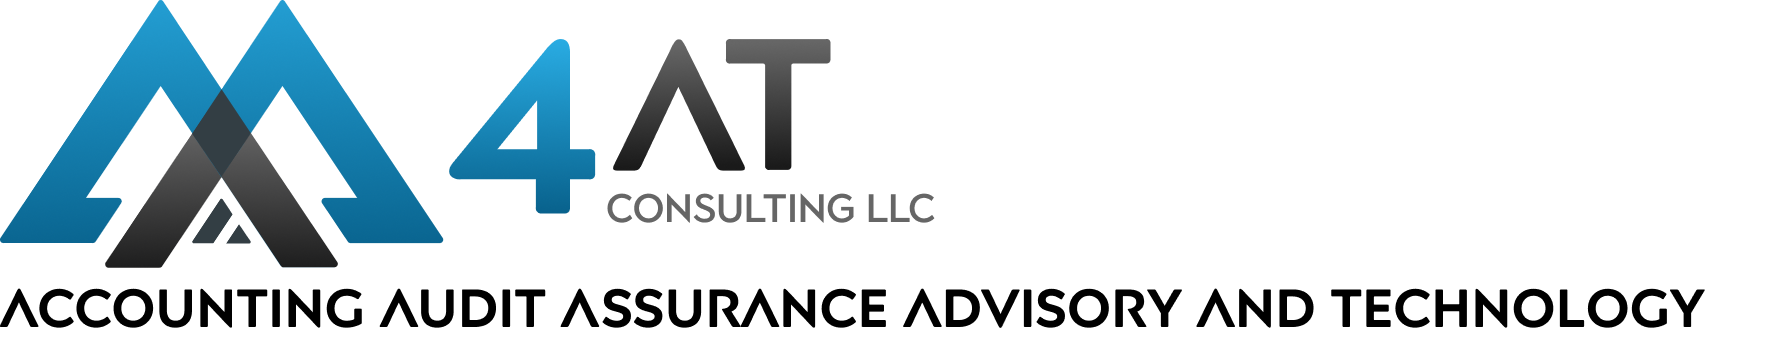 4at-consulting